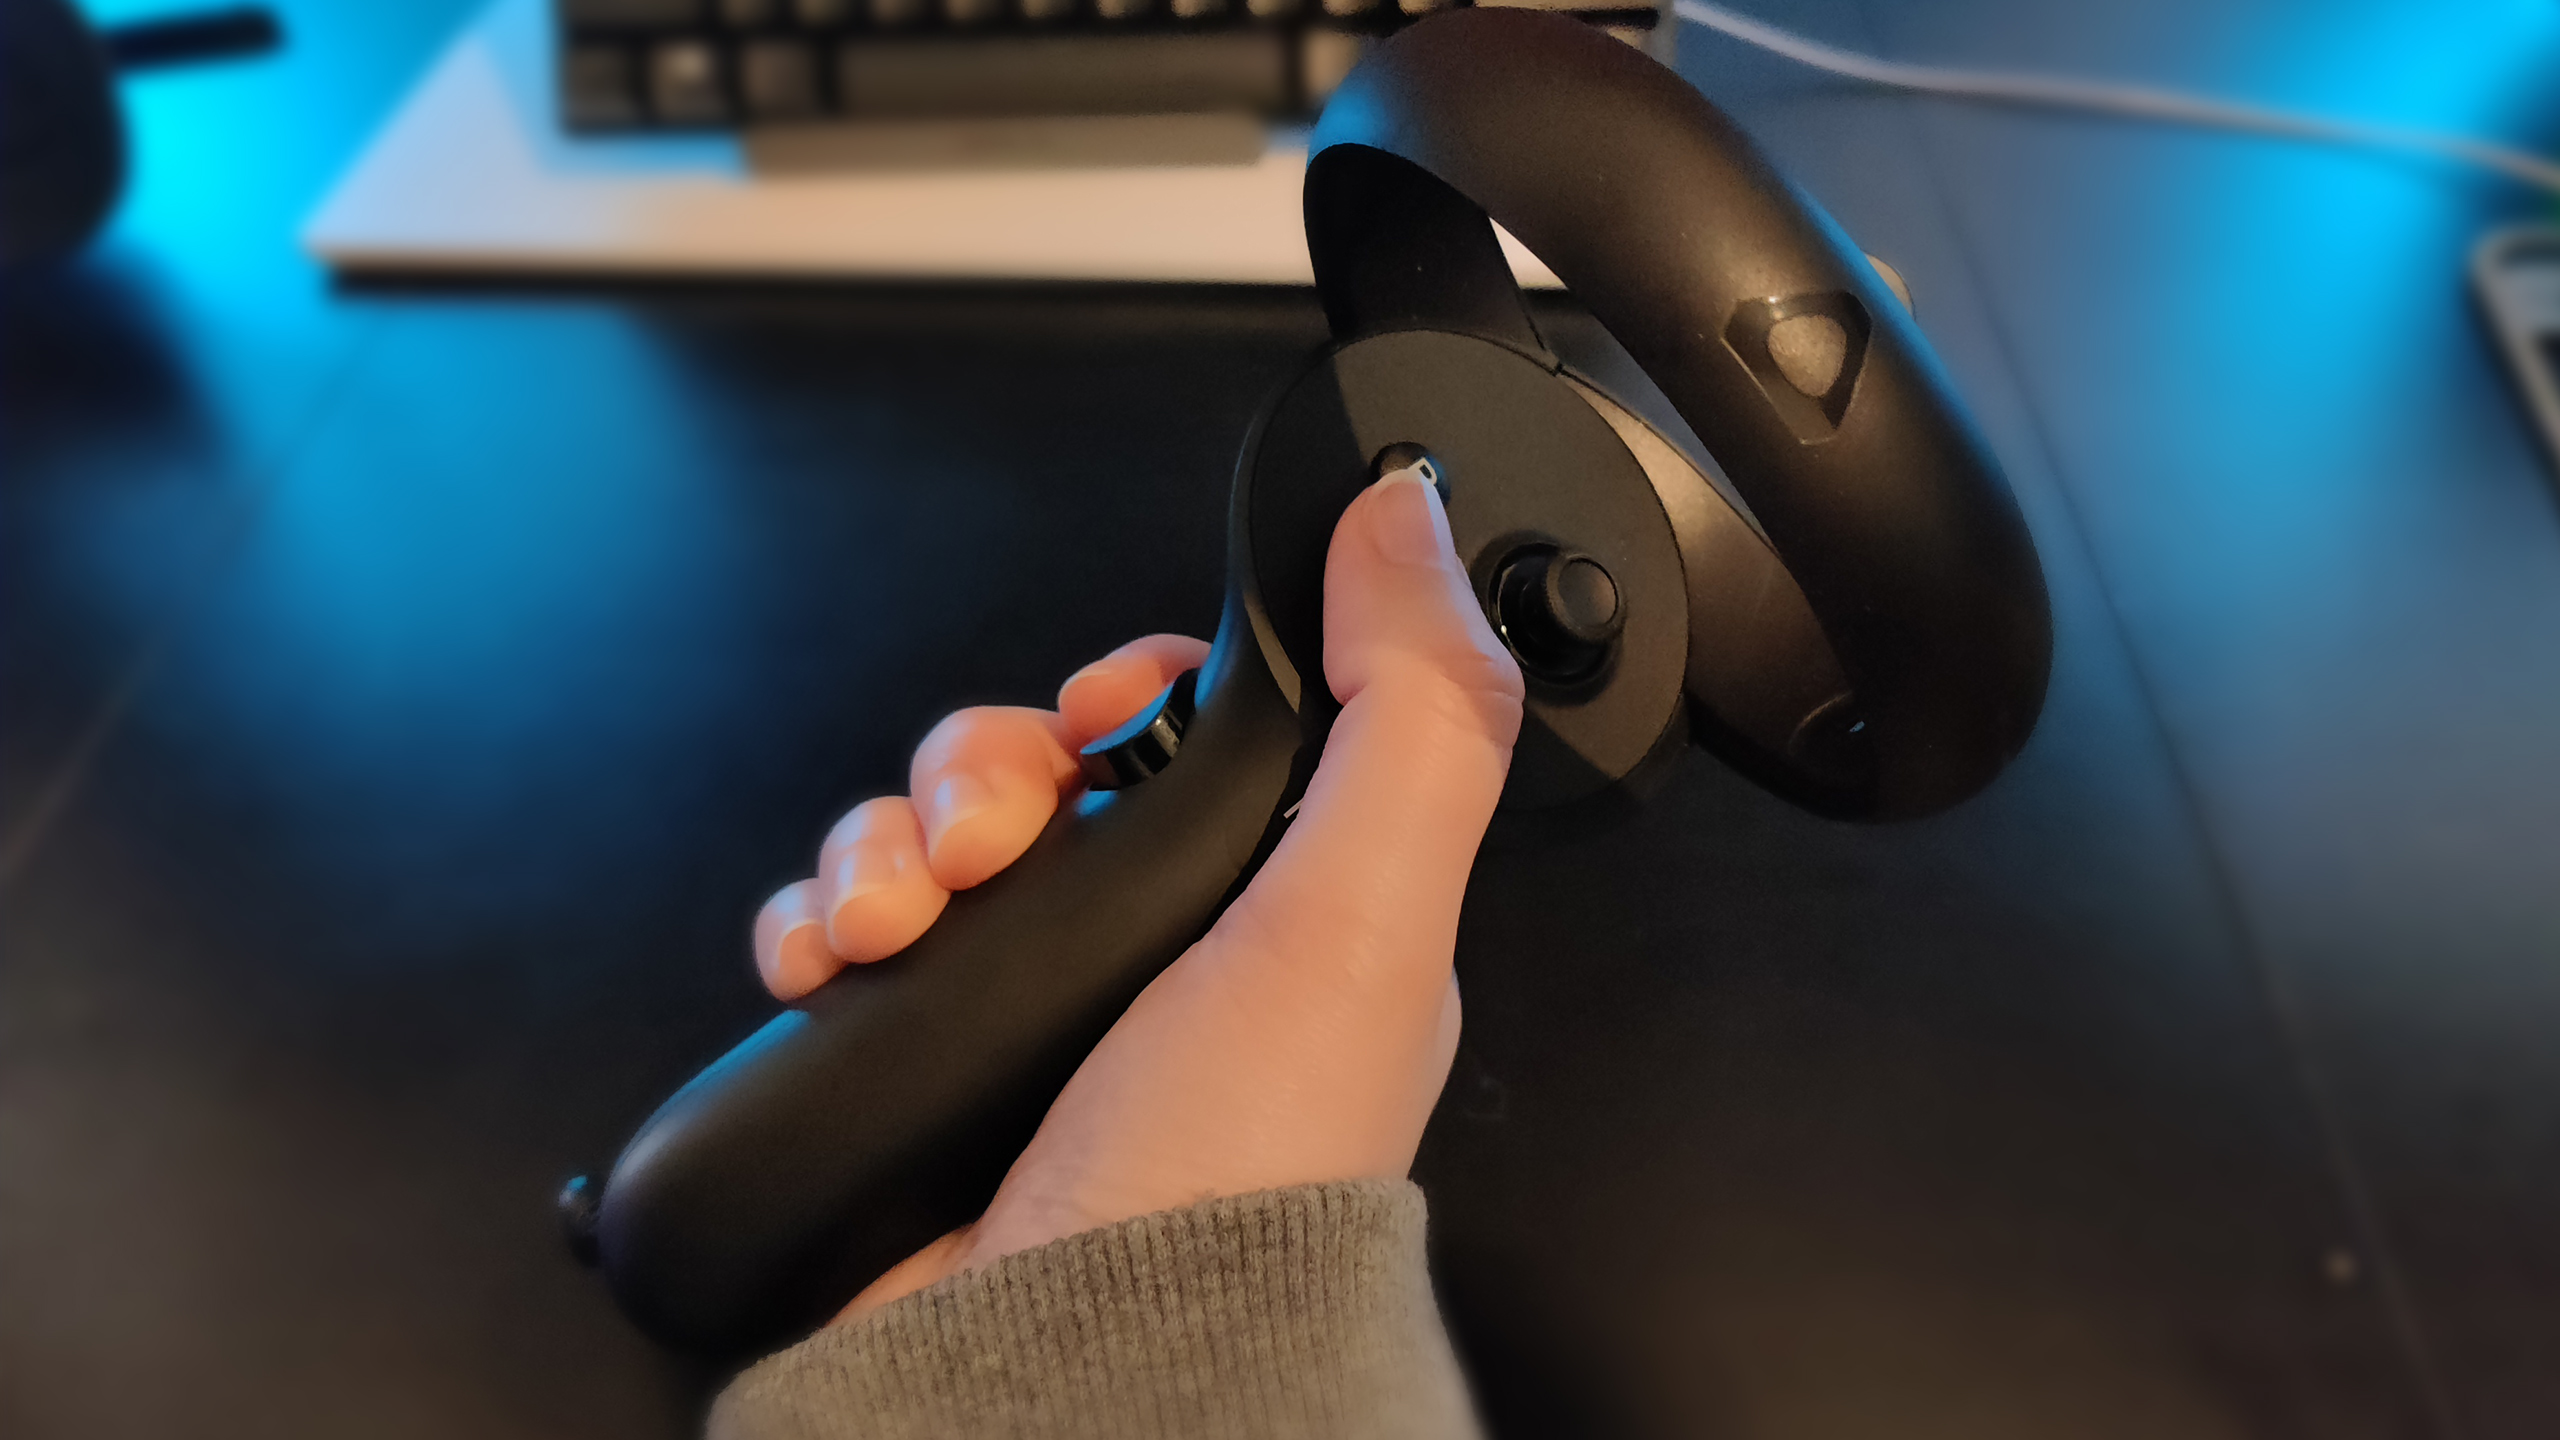 The HTC Vive XR Elite controller in hand